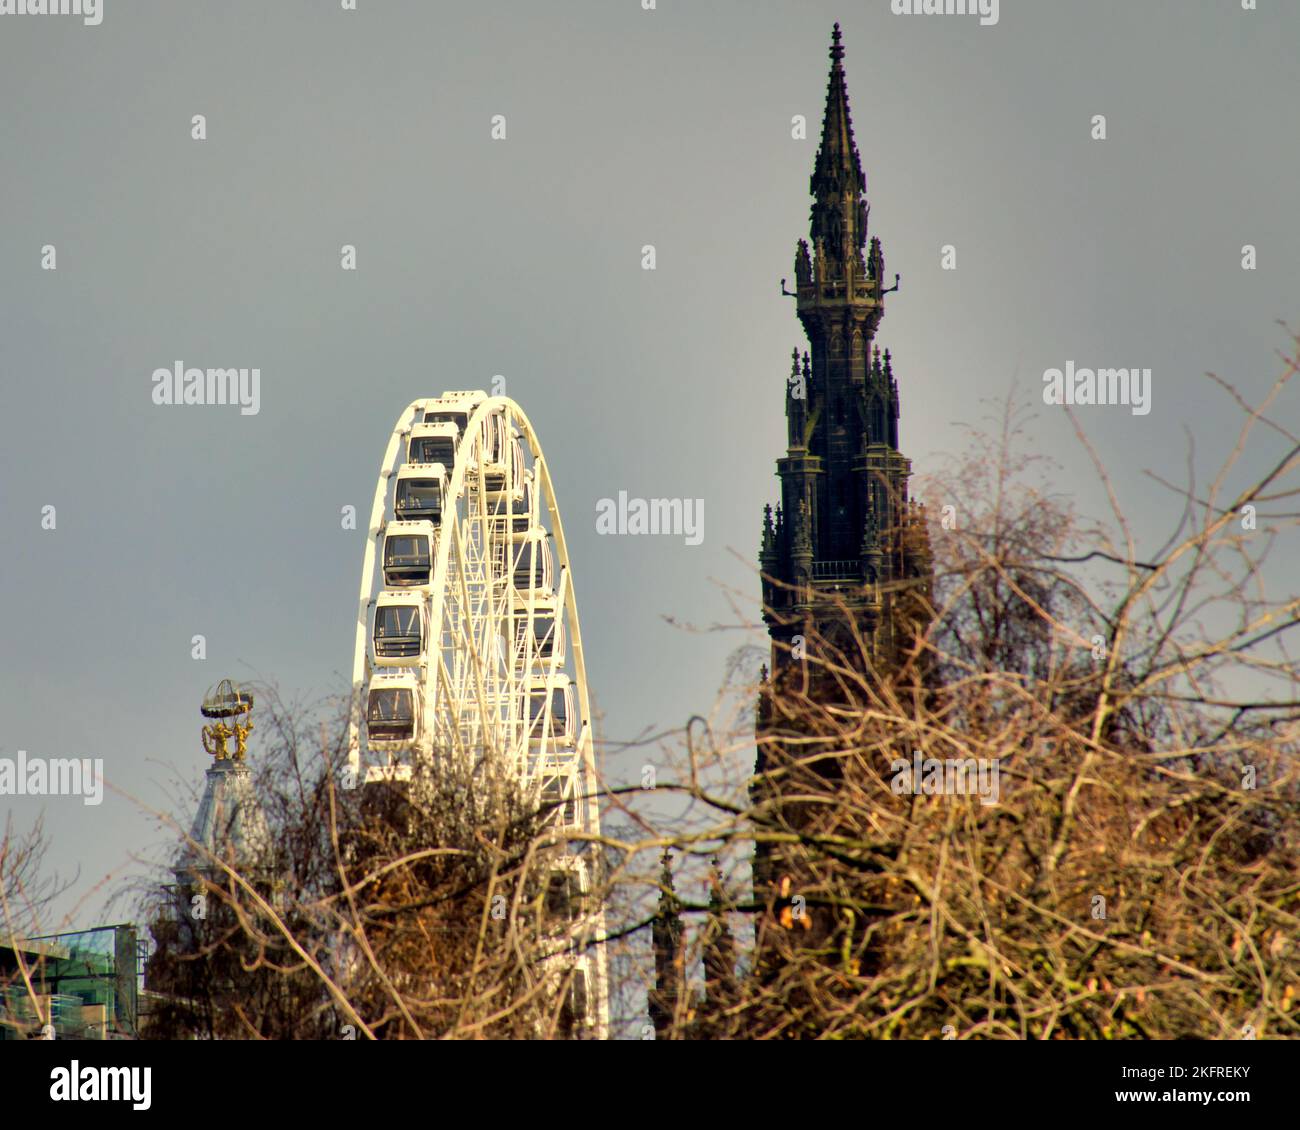 Aerial skyline view featuring the spire of st Cuthbert's church and the  Forth 1 Big Wheel on princes street gardens Stock Photo